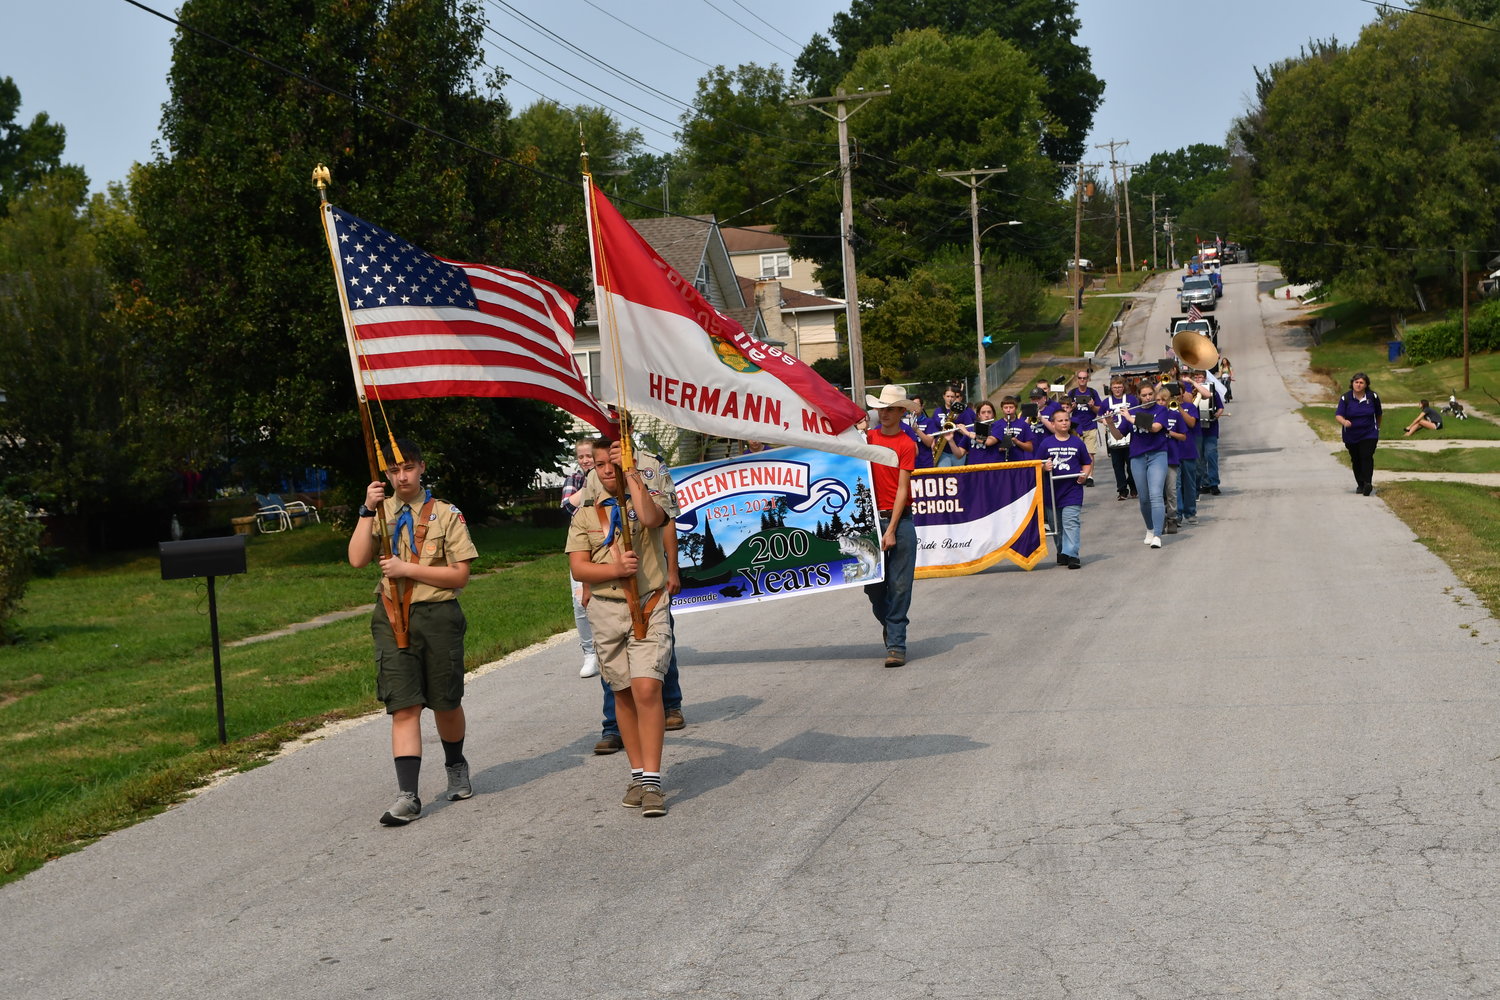 Gasconade residents and former residents celebrated the 200th anniversary of the river community’s founding with a parade and picnic Saturday. Boy Scout Troop 116 from Hermann and the Chamois High School Pirate Pride Band lead the parade into the downtown area.